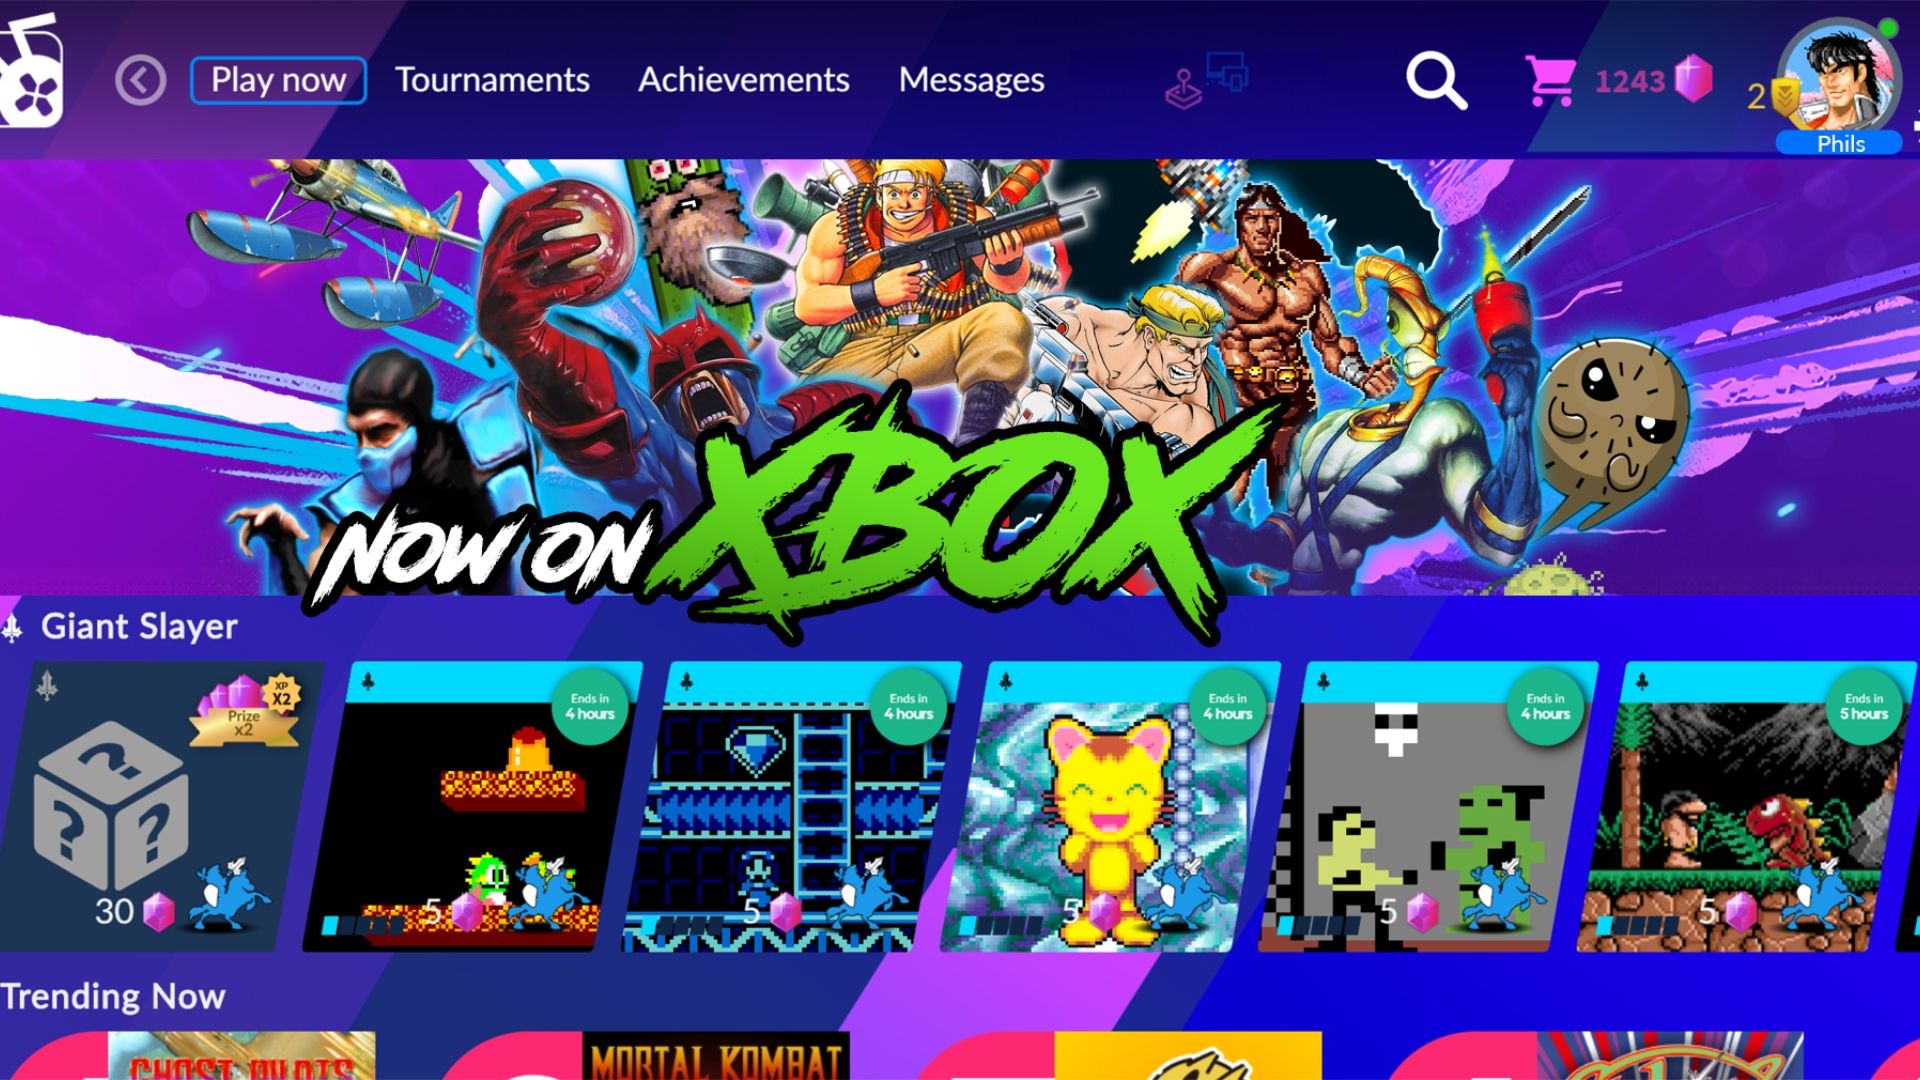 Xbox Game Pass takes the lead for streaming games on mobile